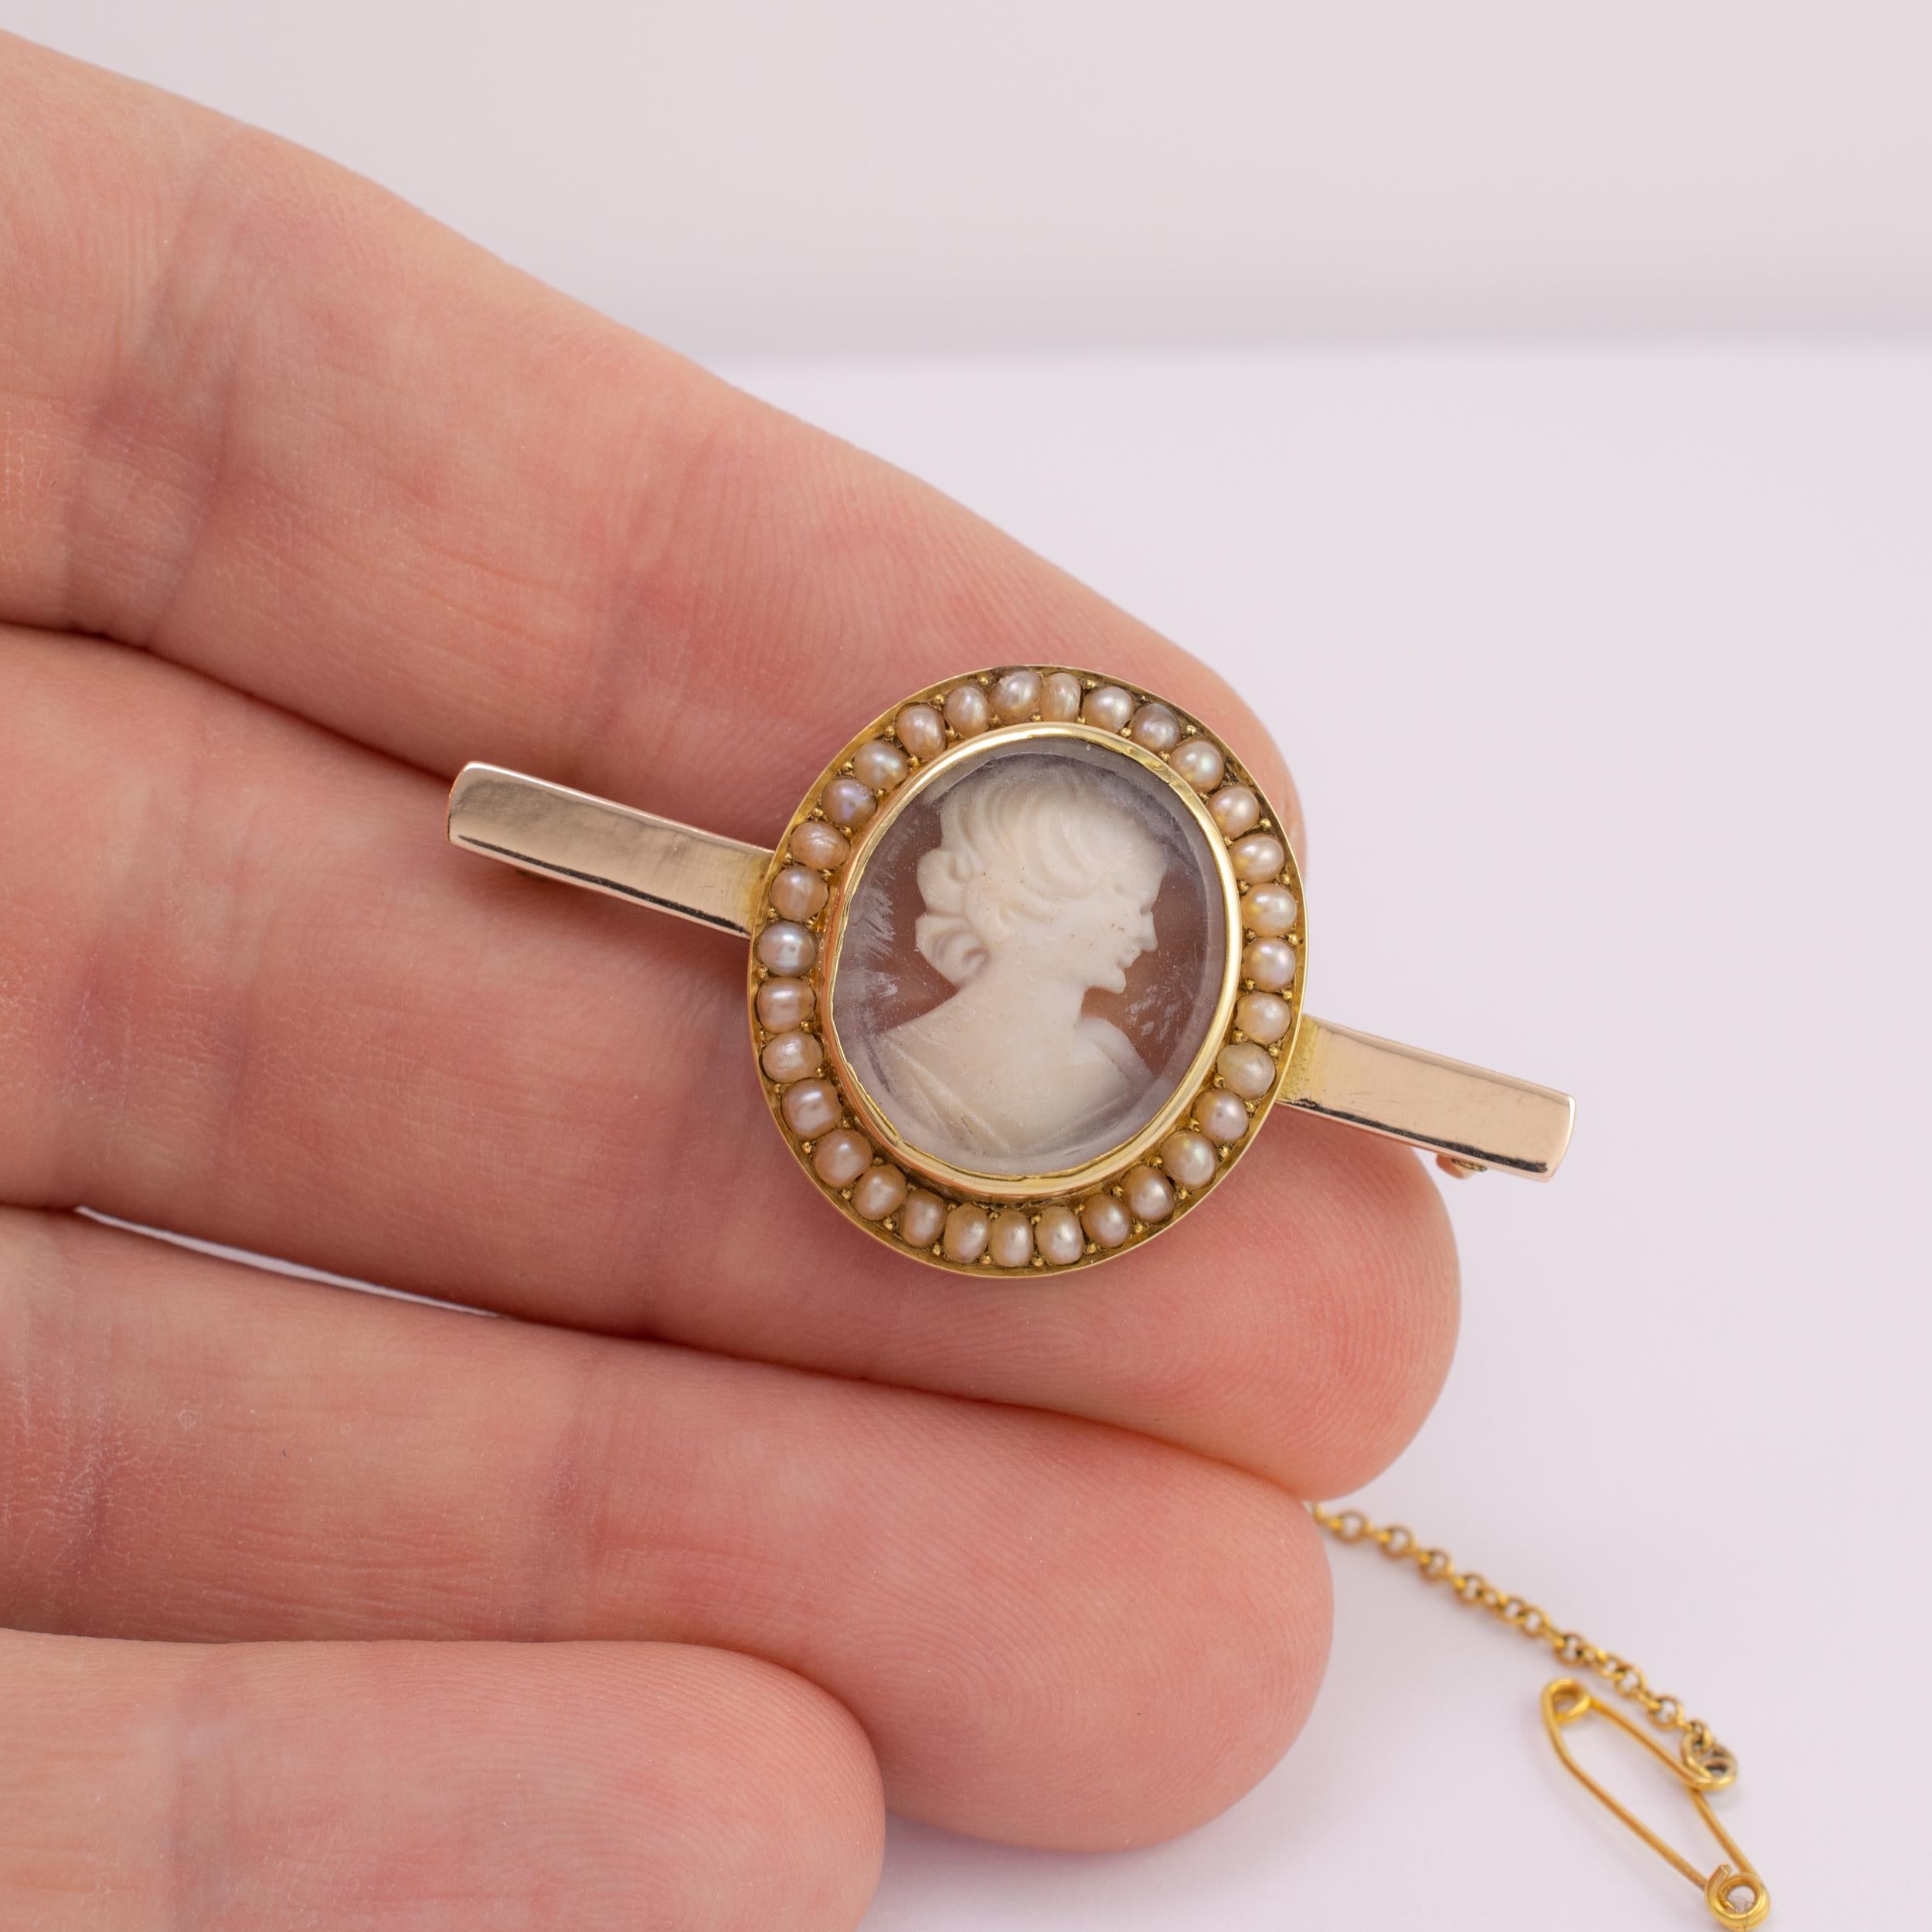 This fine quality antique pearl cameo brooch is crafted in 9 karat gold and dates Circa 1900 Germany.

The brooch displays a center oval gold mount with bezel edge set with female portrait, in relief, carved from shell, encased inside protective